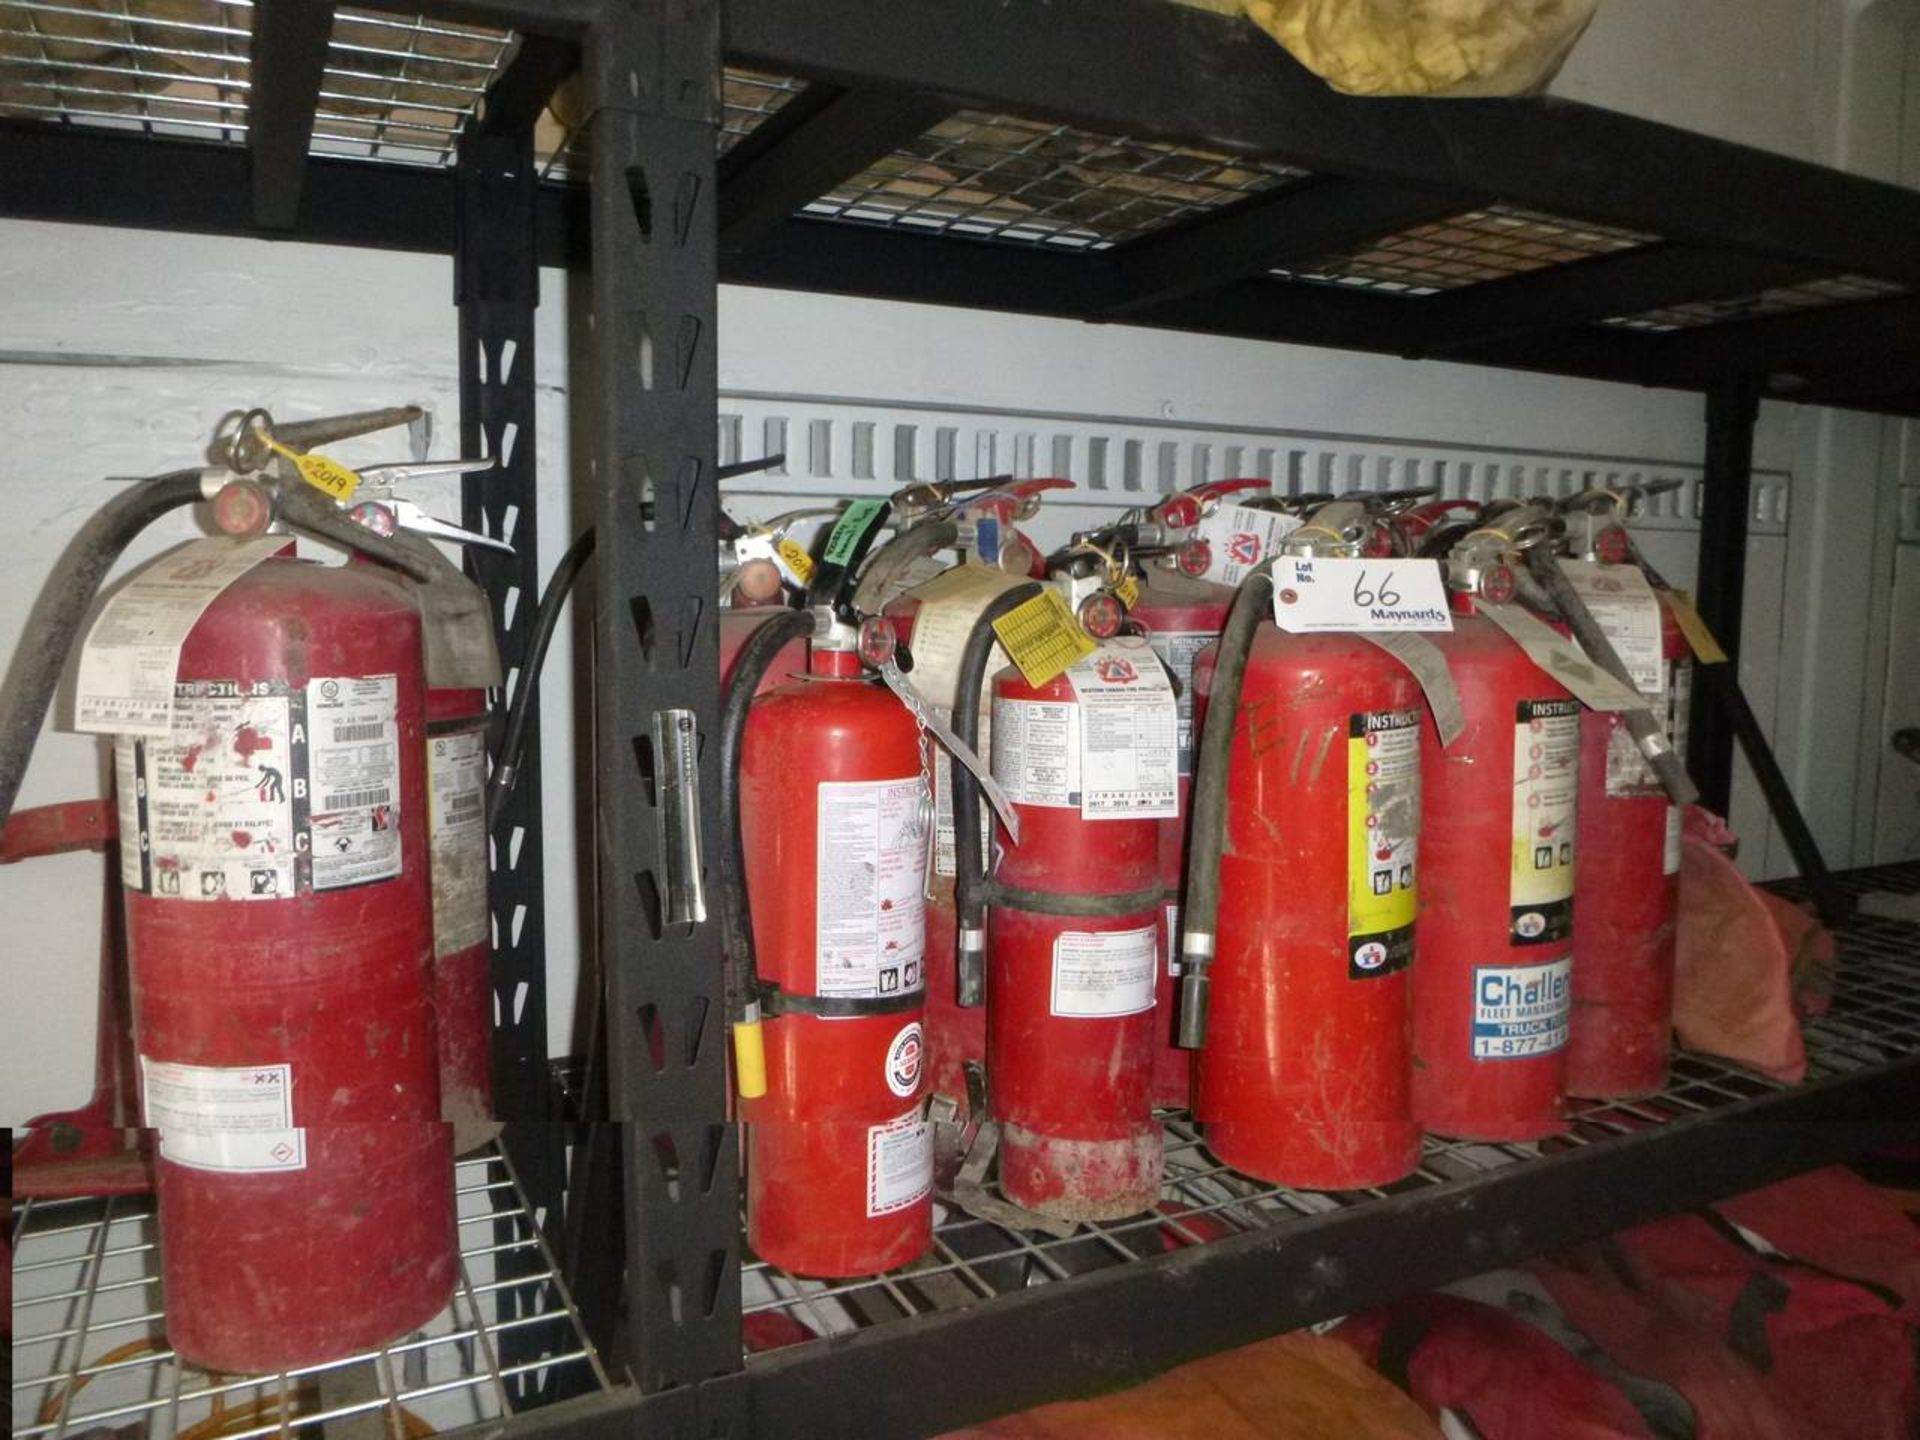 Lot of fire extinguishers